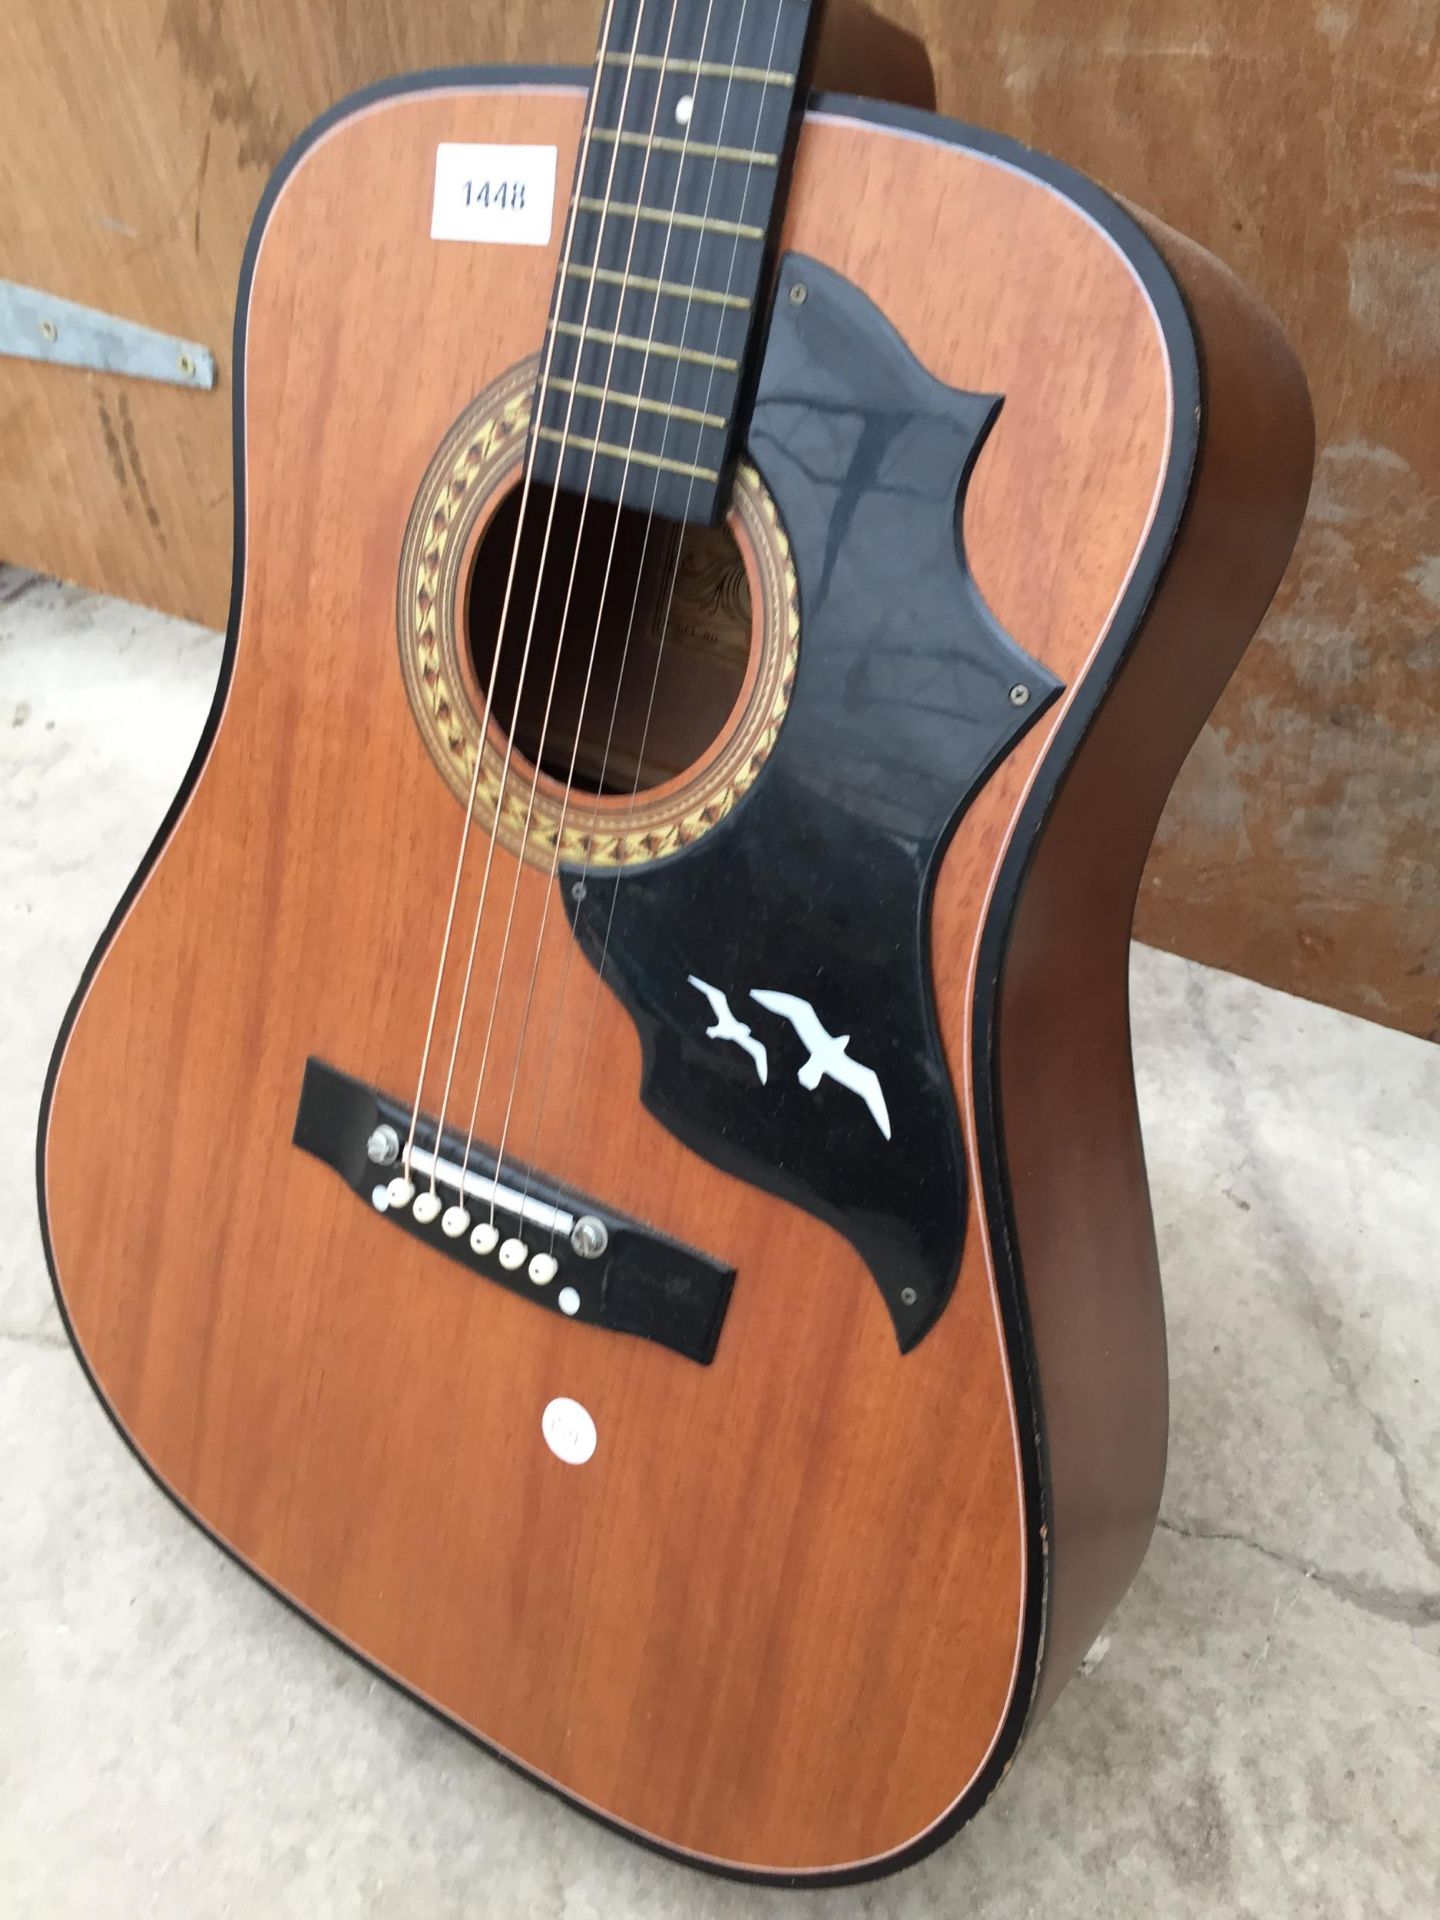 A KAY ACOUSTIC GUITAR - Image 2 of 6